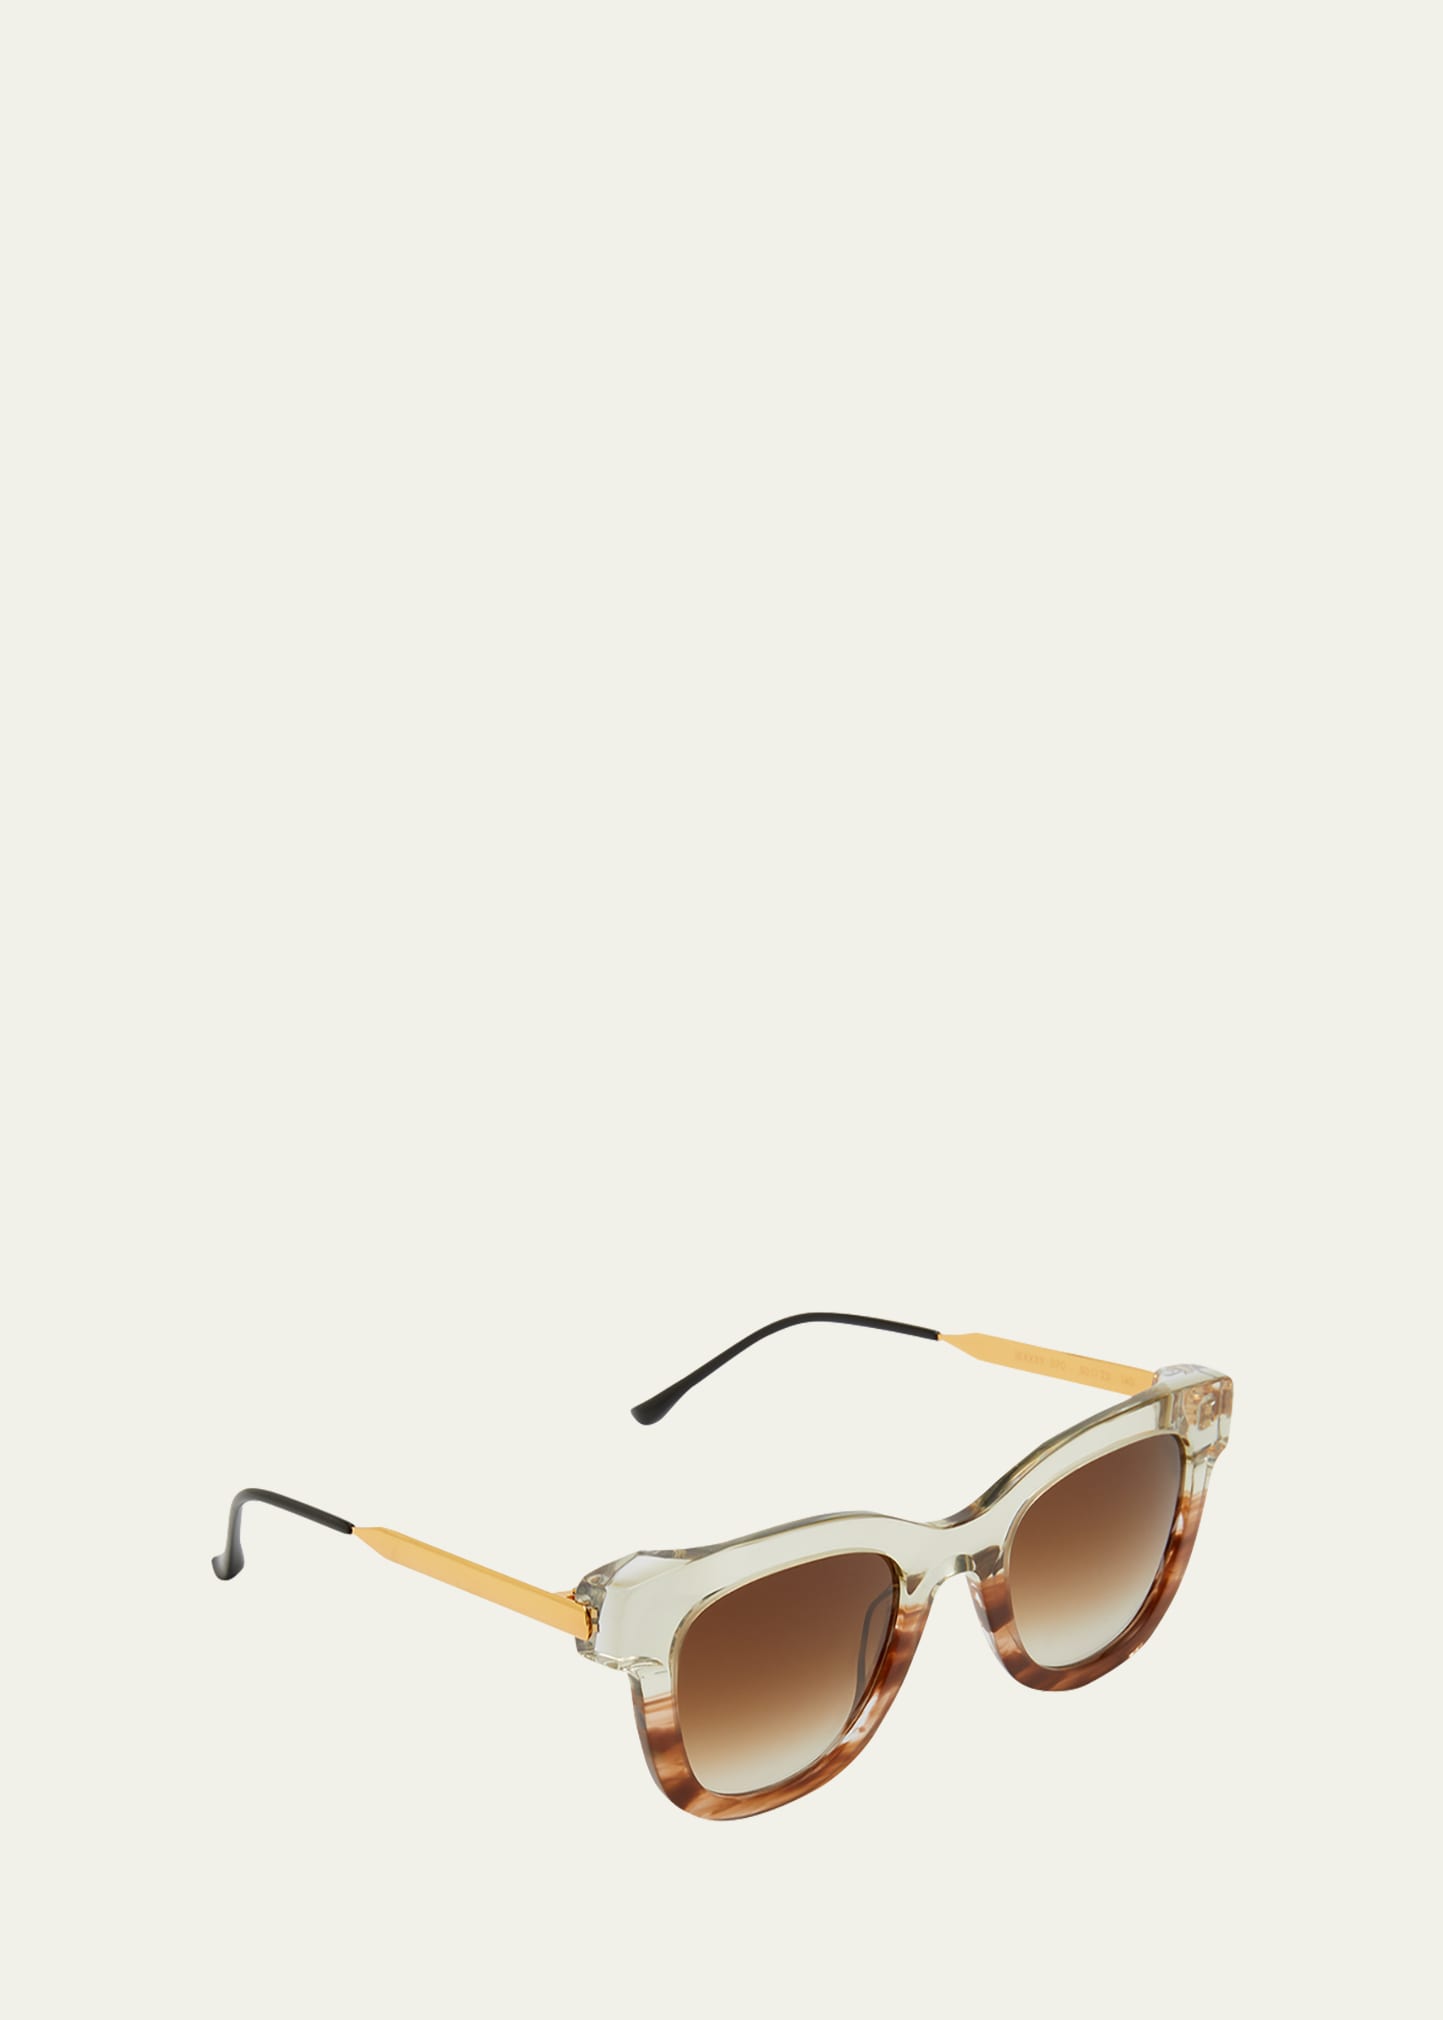 Thierry Lasry Sexxxy Metal & Acetate Cat-eye Sunglasses In Brnleo/brn